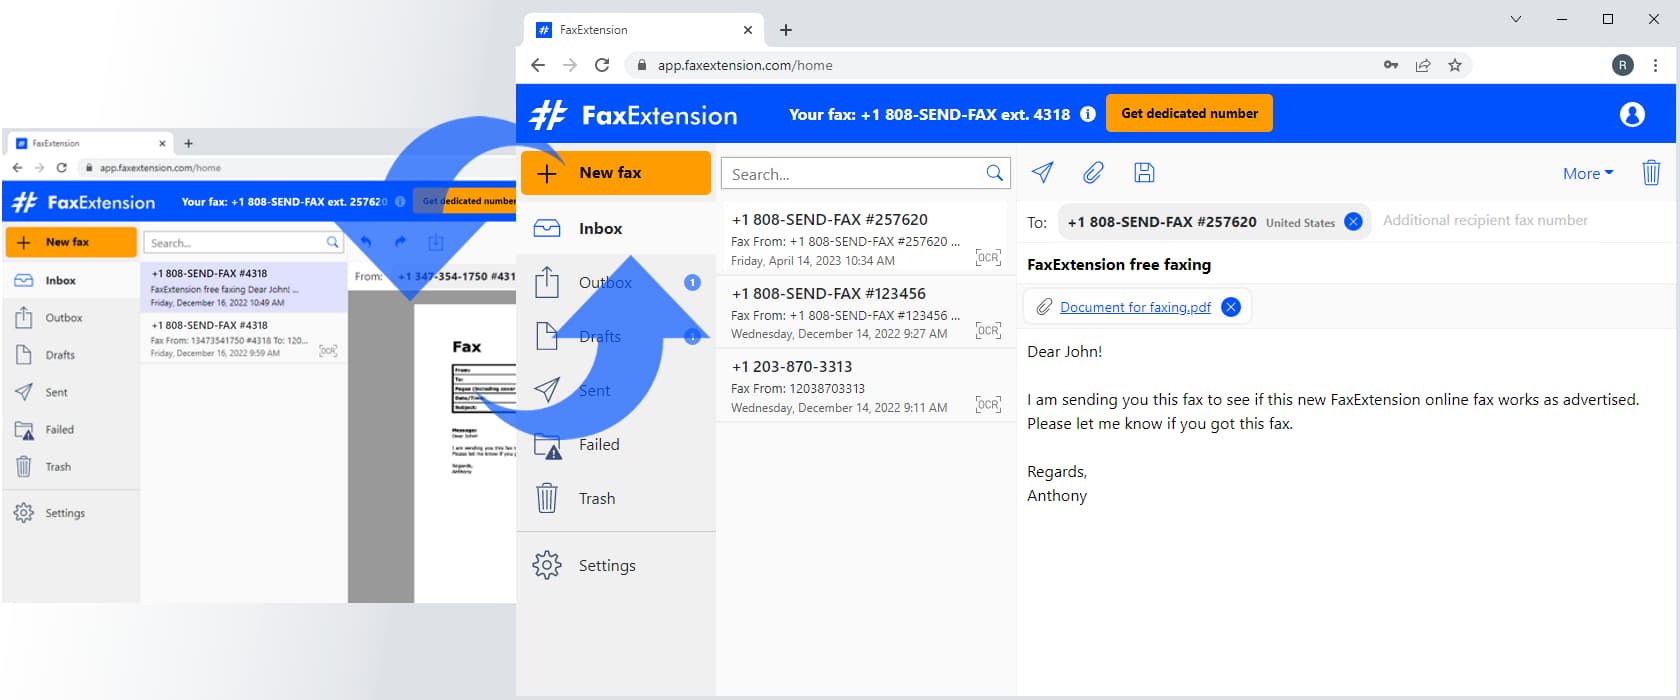 Unlimited free faxing between FaxExtension users